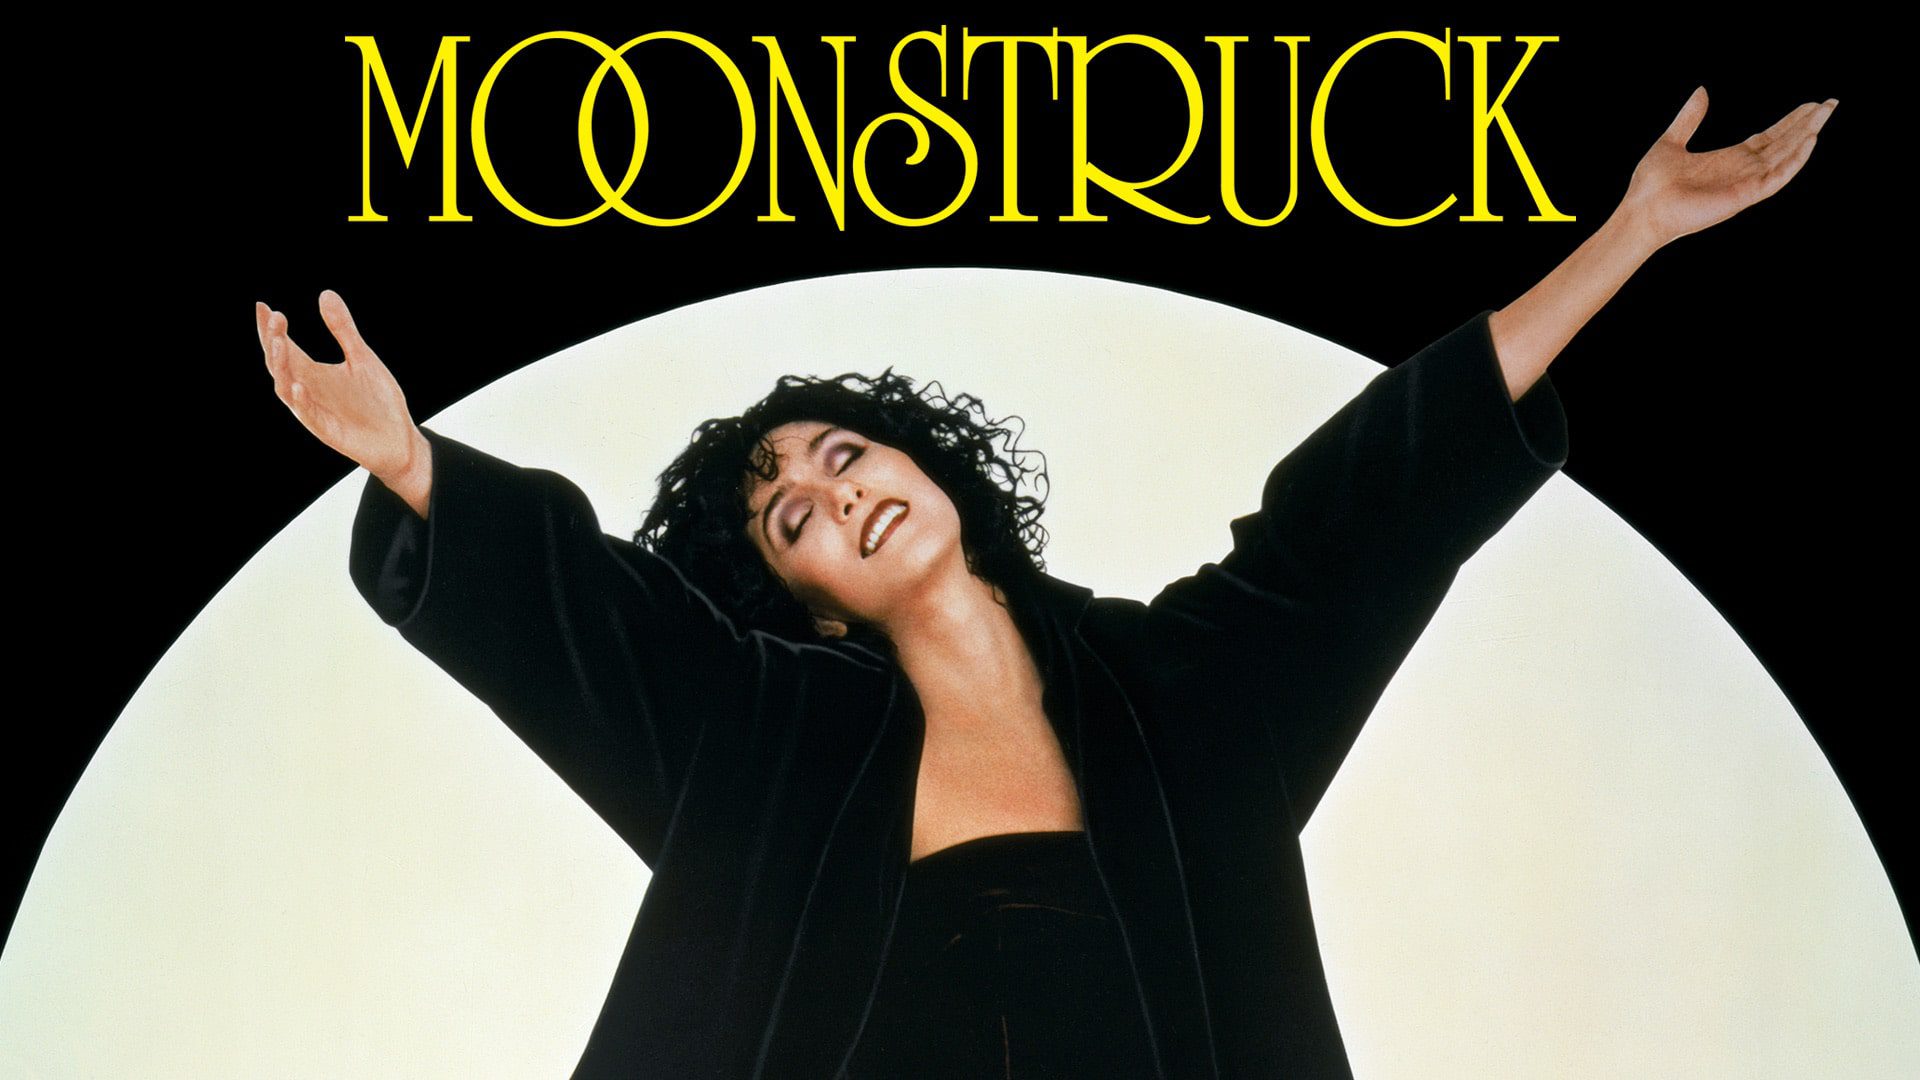 The poster of Moonstruck